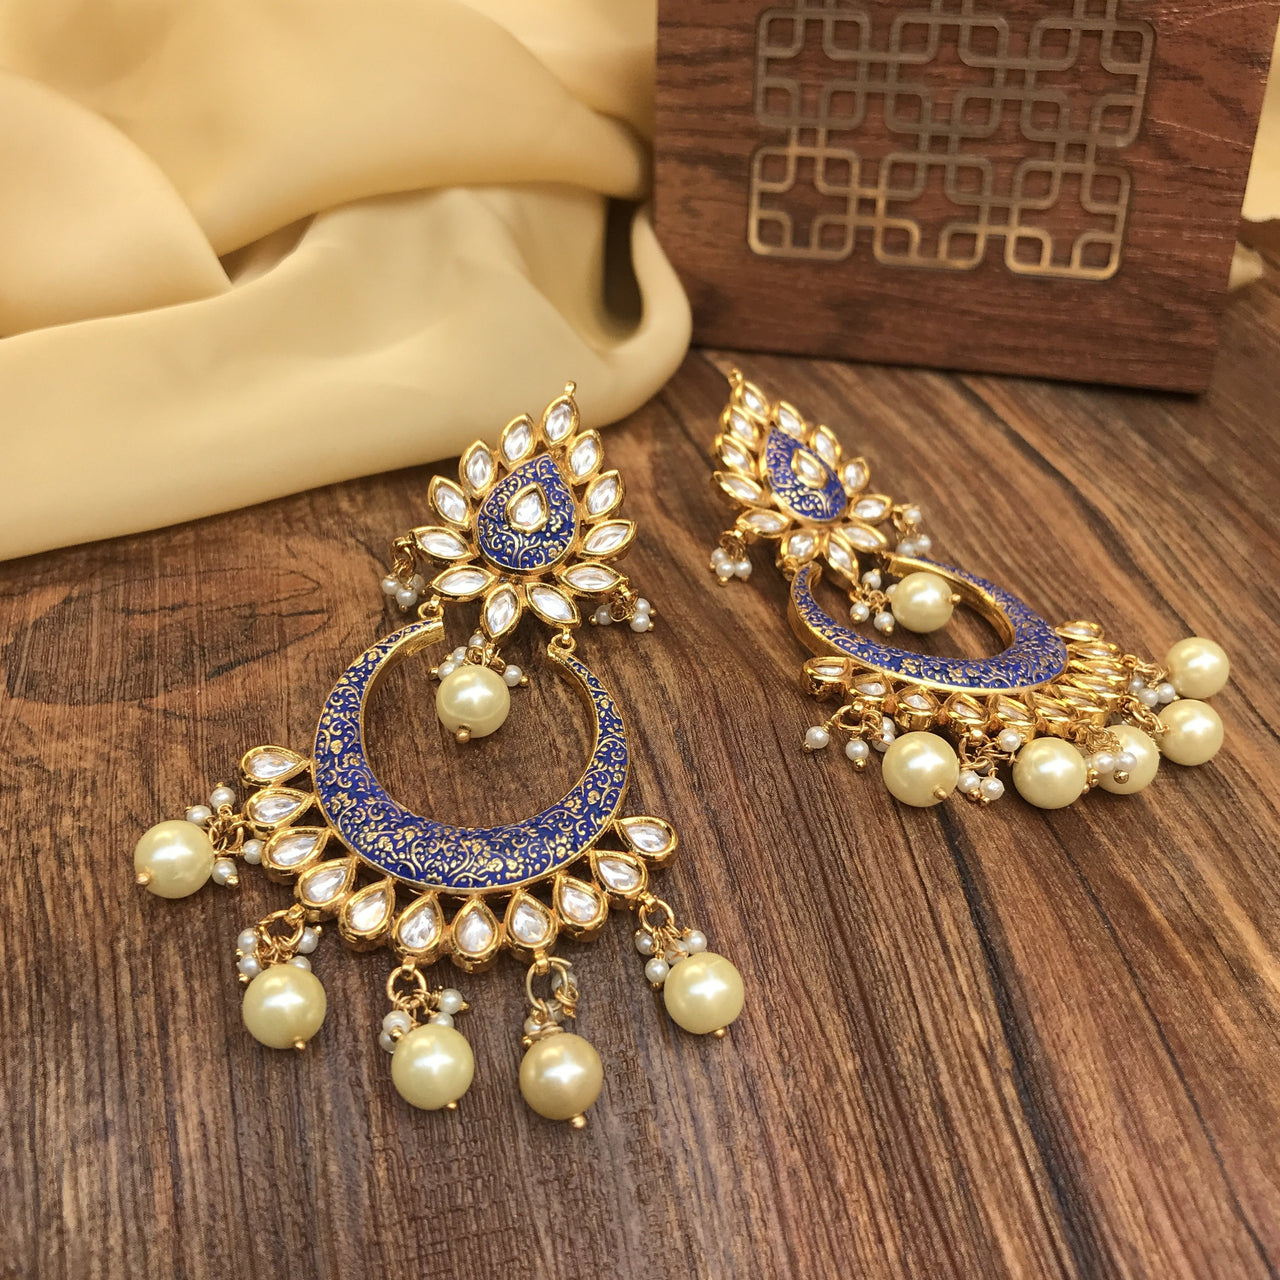 Chand bali | Gold jewellery design necklaces, Gold jewelry fashion, Jewelry design  earrings